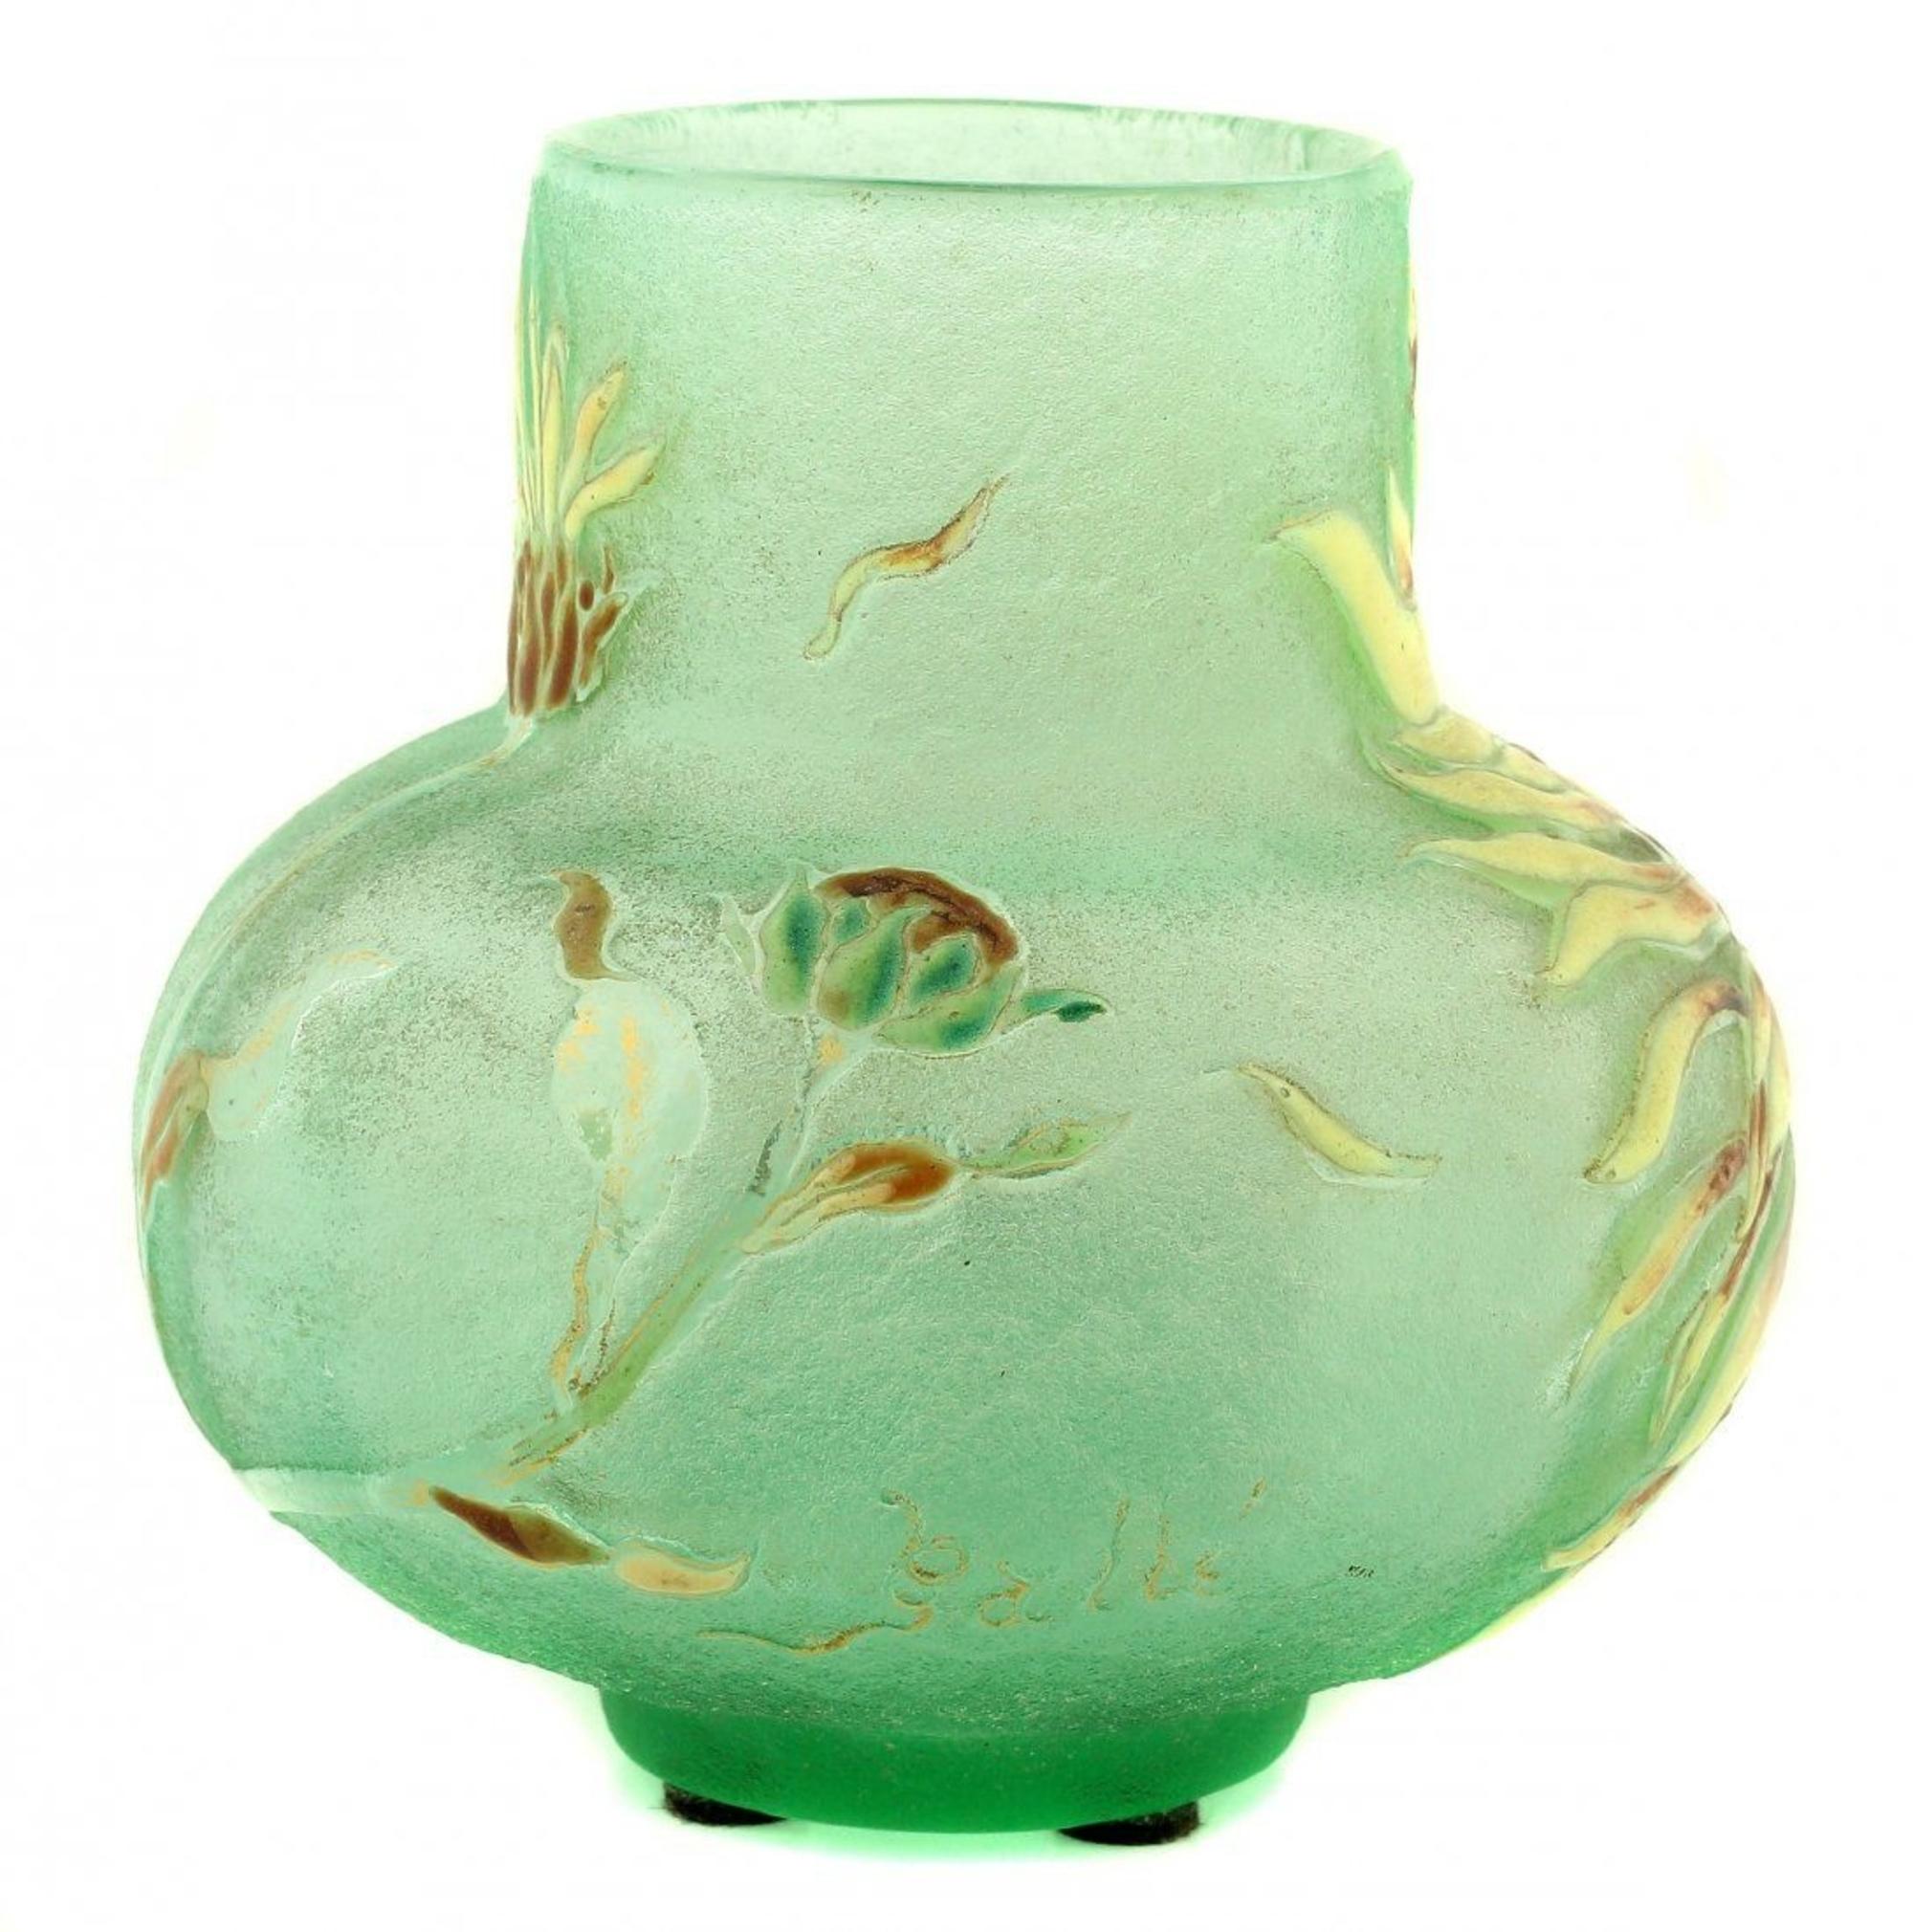 Emile Gallé, French (1846-1904)
An enameled, decorated cameo glass vase, circa 1895
Measure: 4.75 in. (12 cm.) high
signed Gallé.